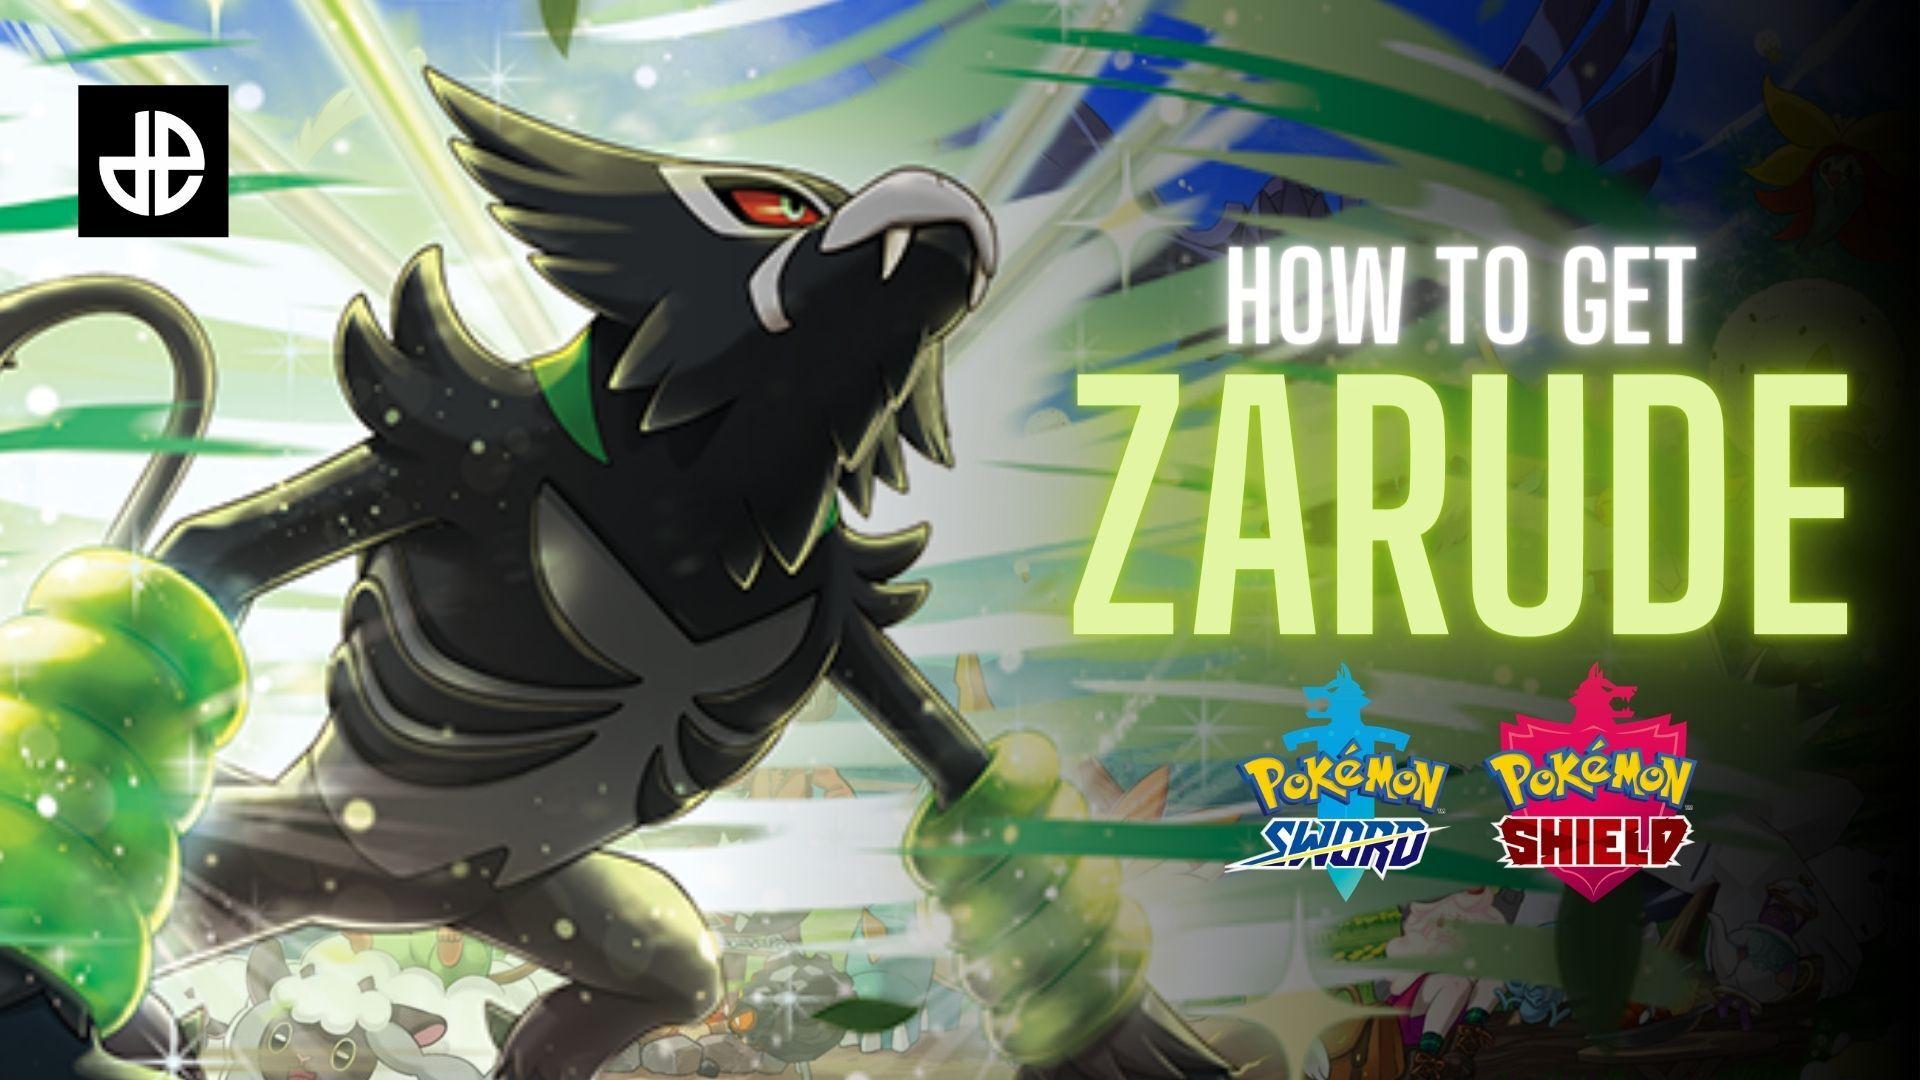 GAME.co.uk - The Mythical Pokémon #Zarude is swinging into GAME 🌴 Pick up  your free code in-store today! #PokemonSwordShield #GottaCatchEmAll